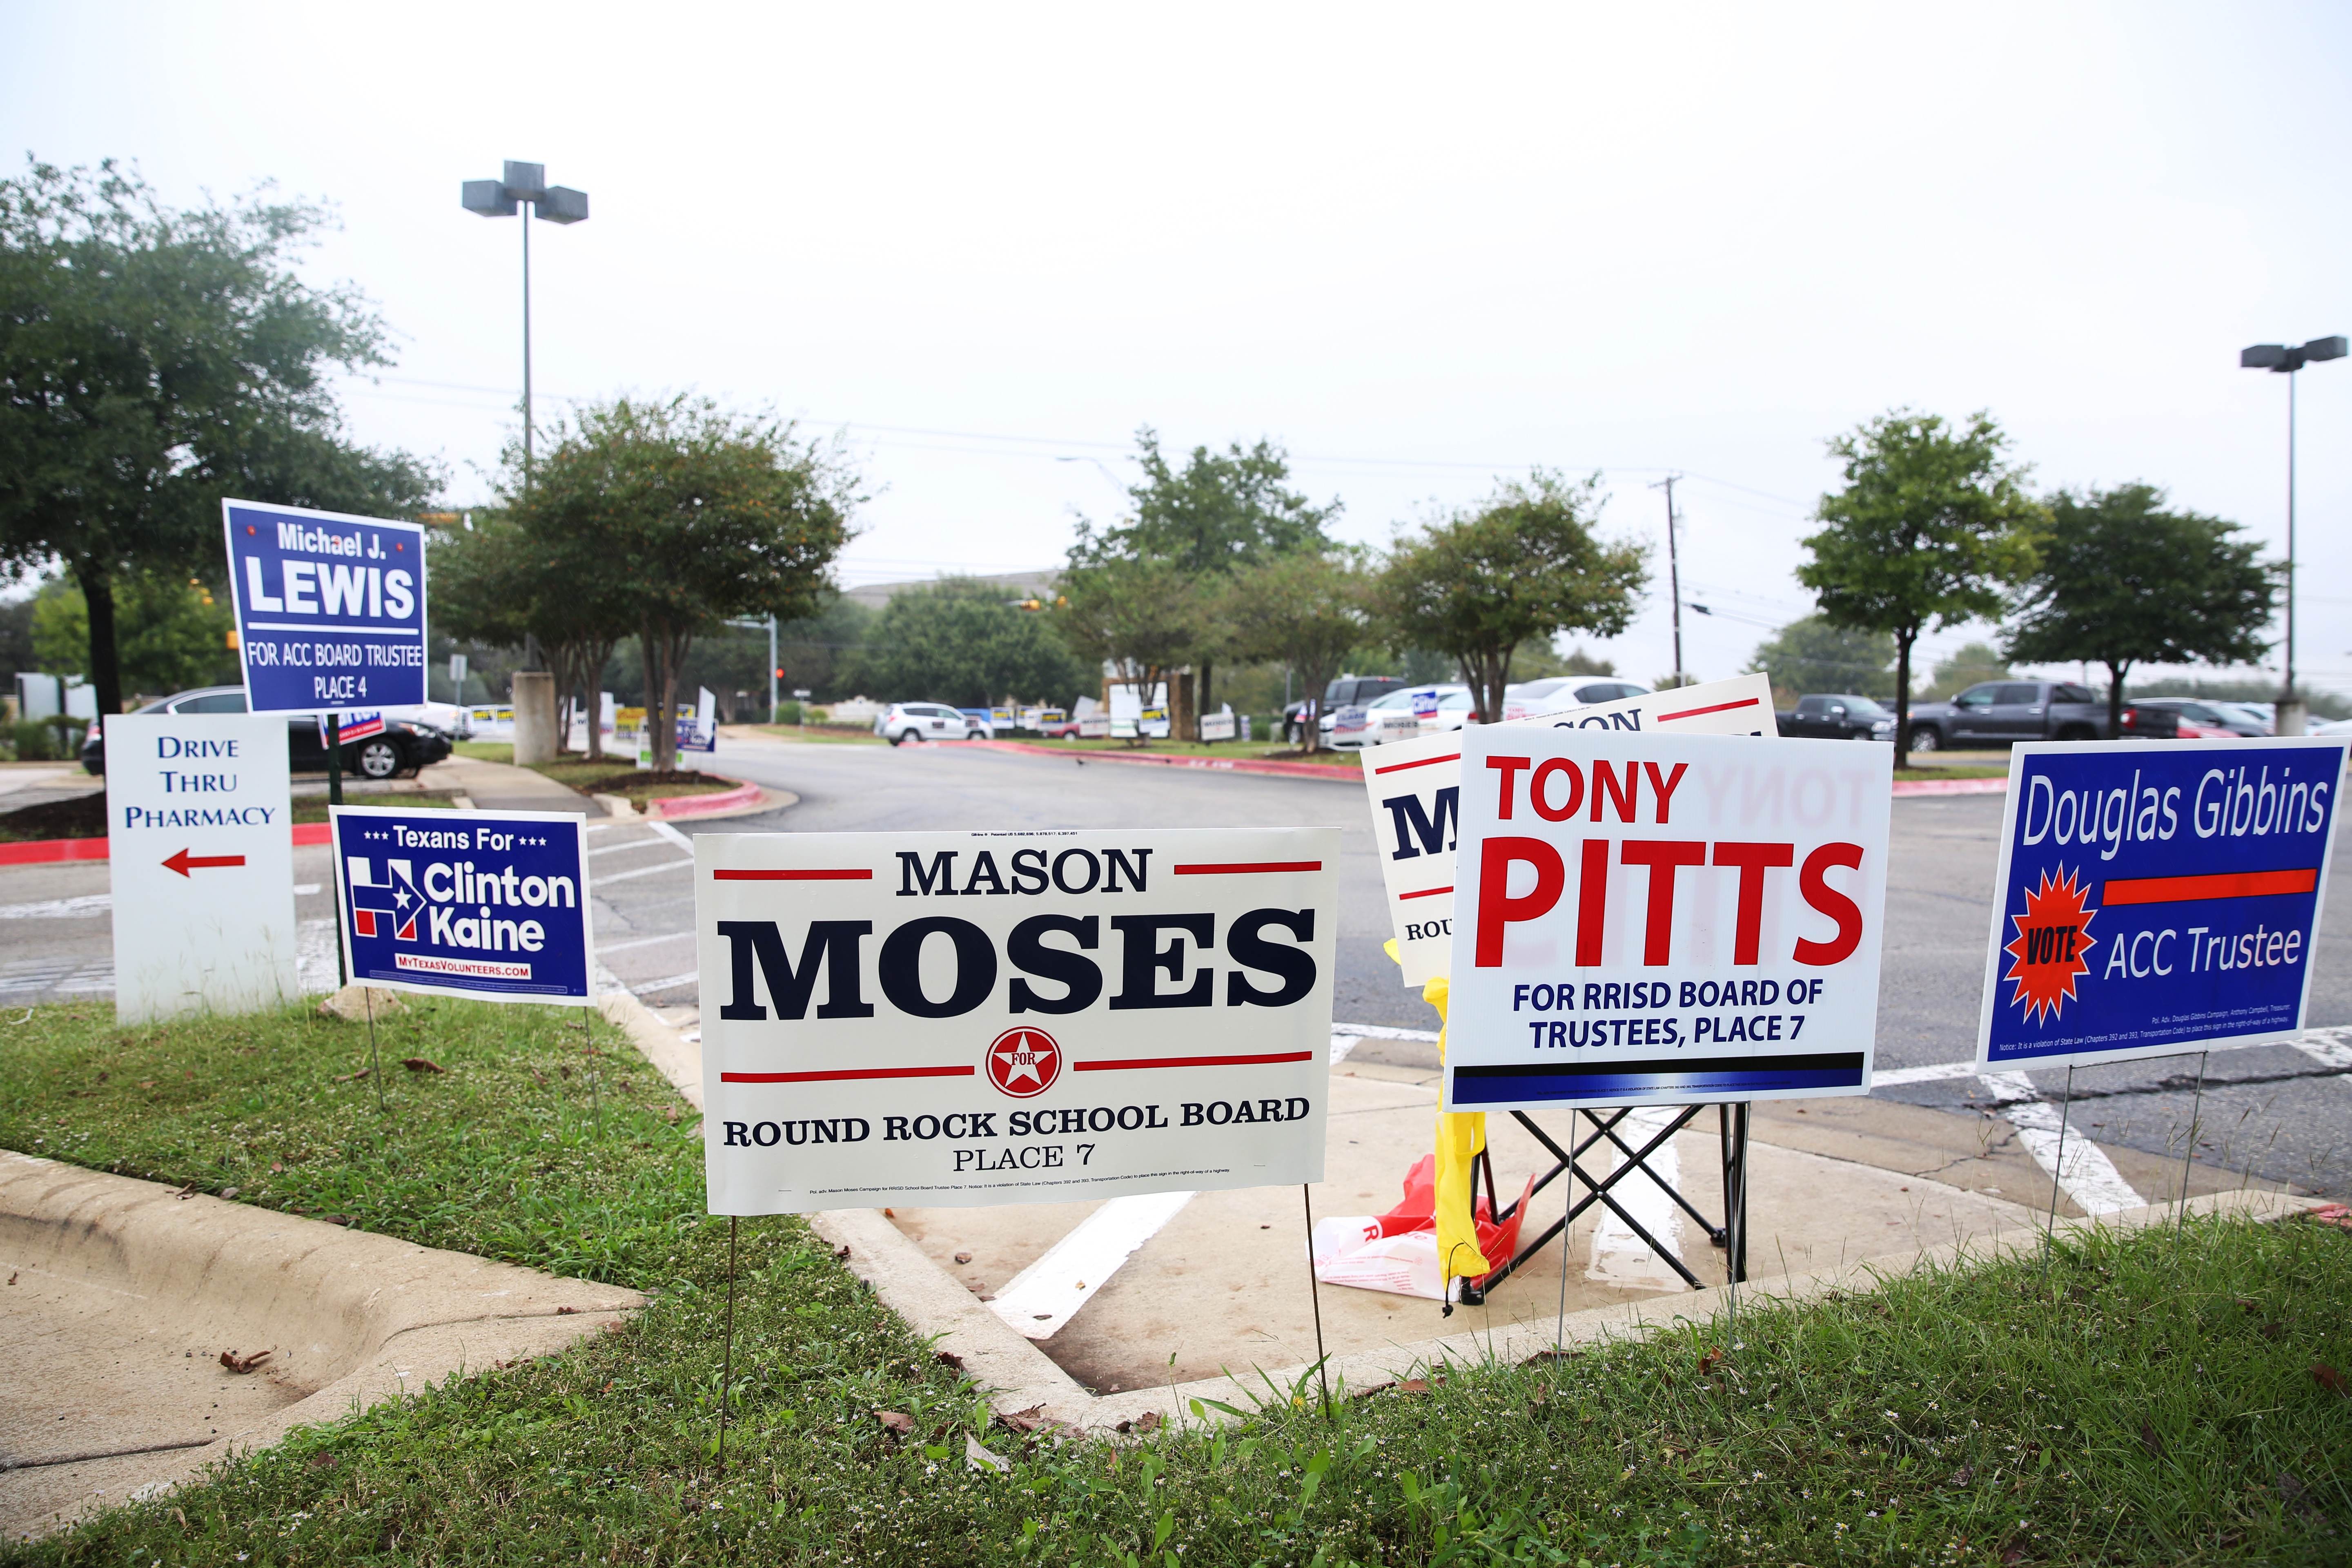 Various kind of campaign signs were put up next to the polling station at Randalls in Round Rock on election day. Filing Wang/Reporting Texas